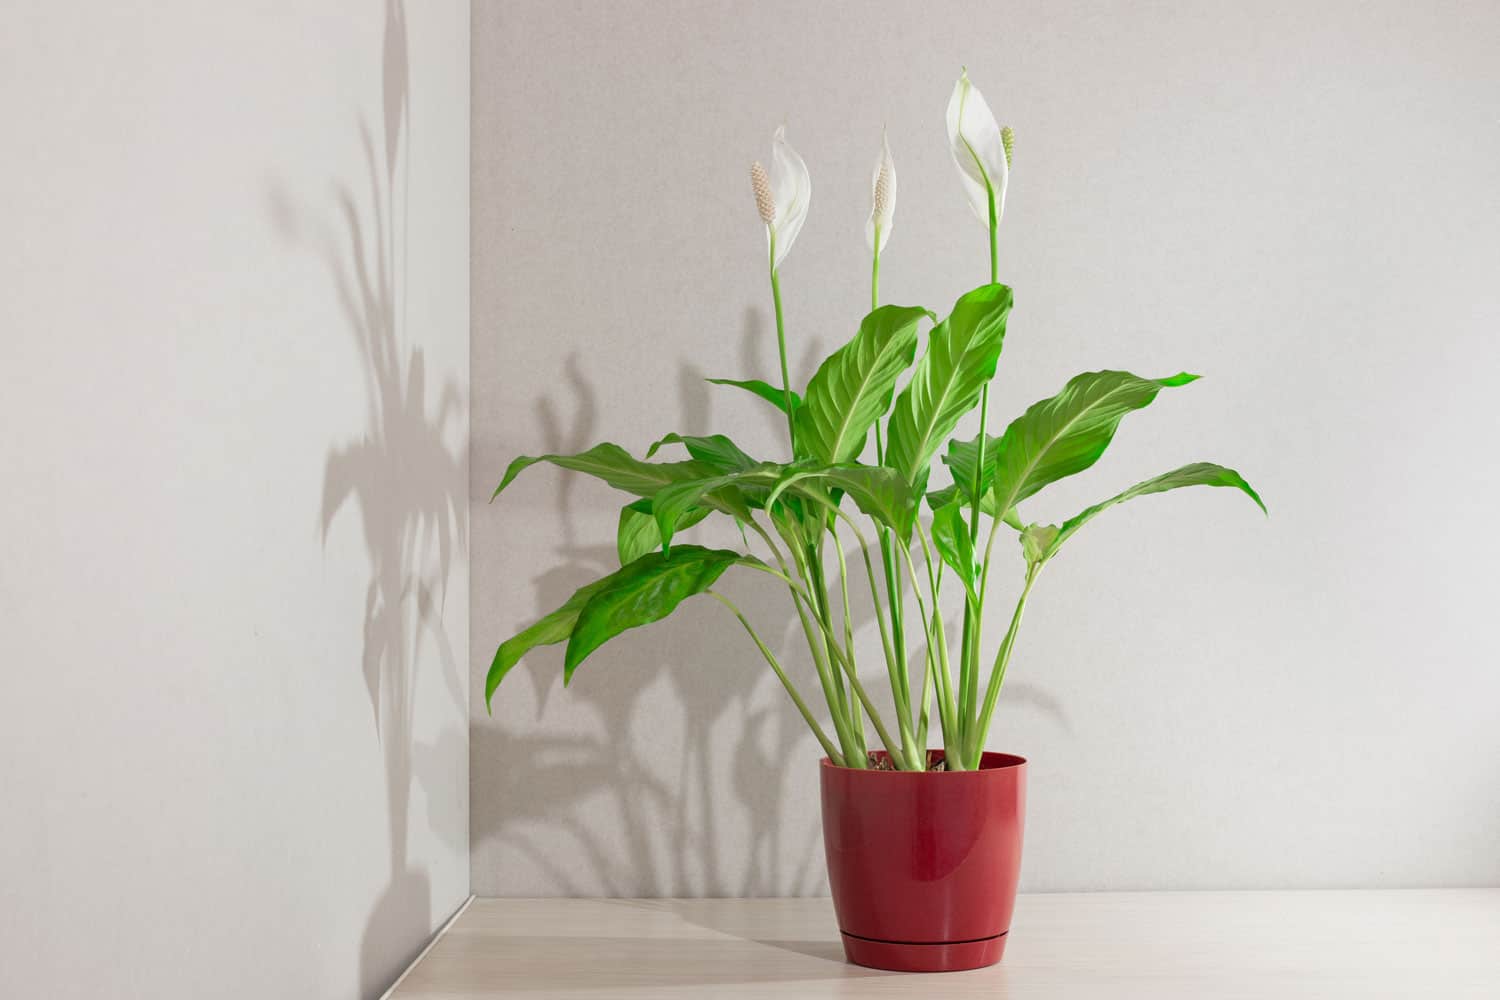 A beautiful peace lily placed in the corner of the living room